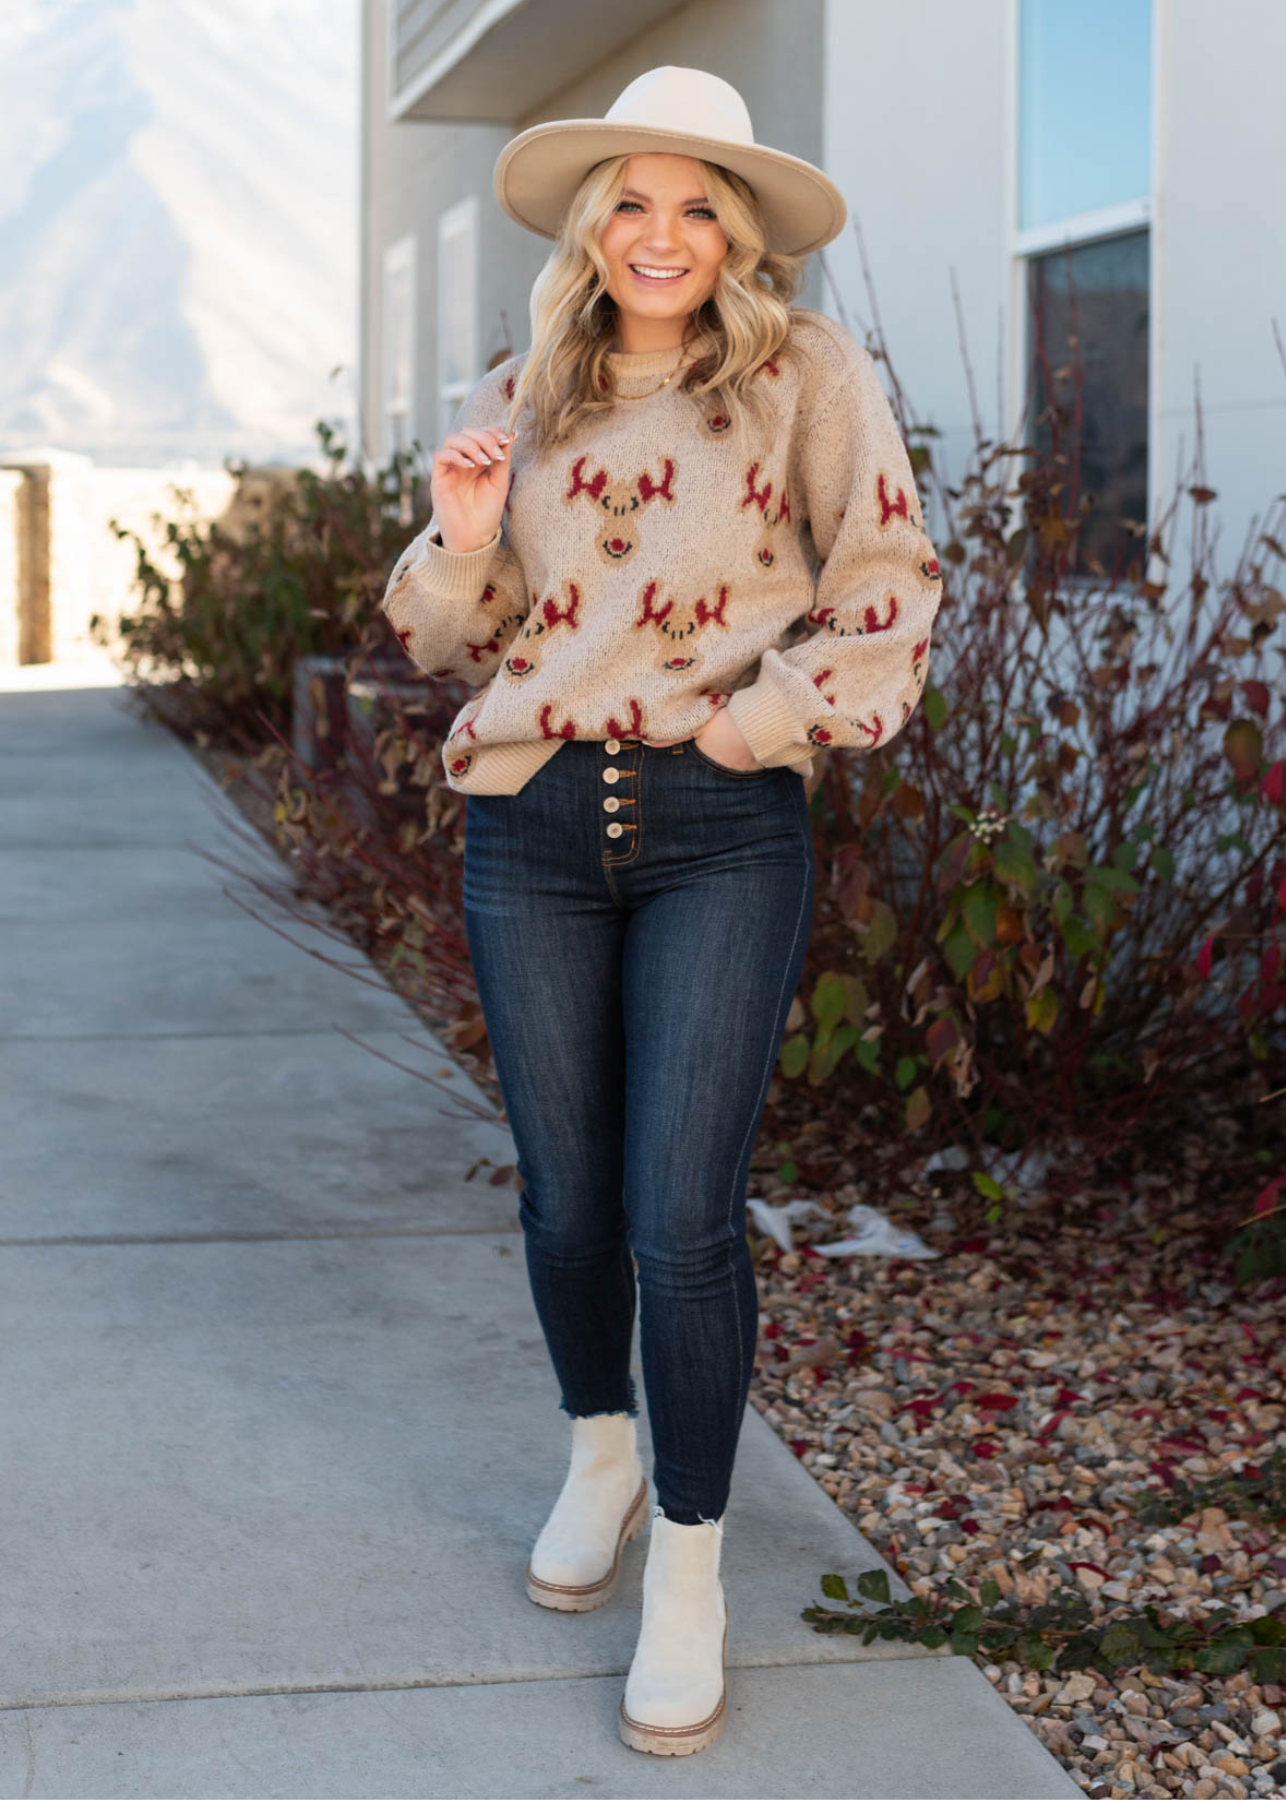 Rudolph oatmeal knit sweater